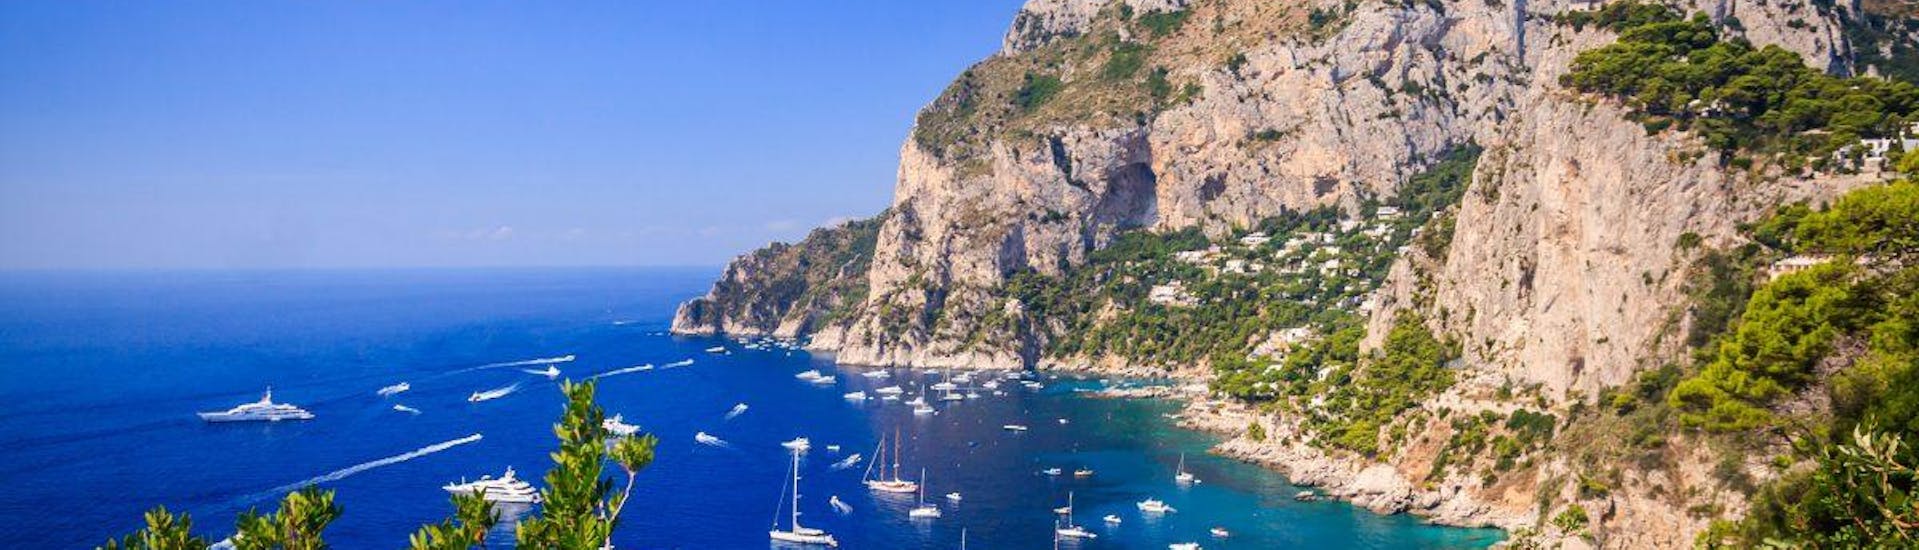 You can see the beautiful harbor of Capri in this Boat Trip from Torre del Greco and Ercolano to Capri.